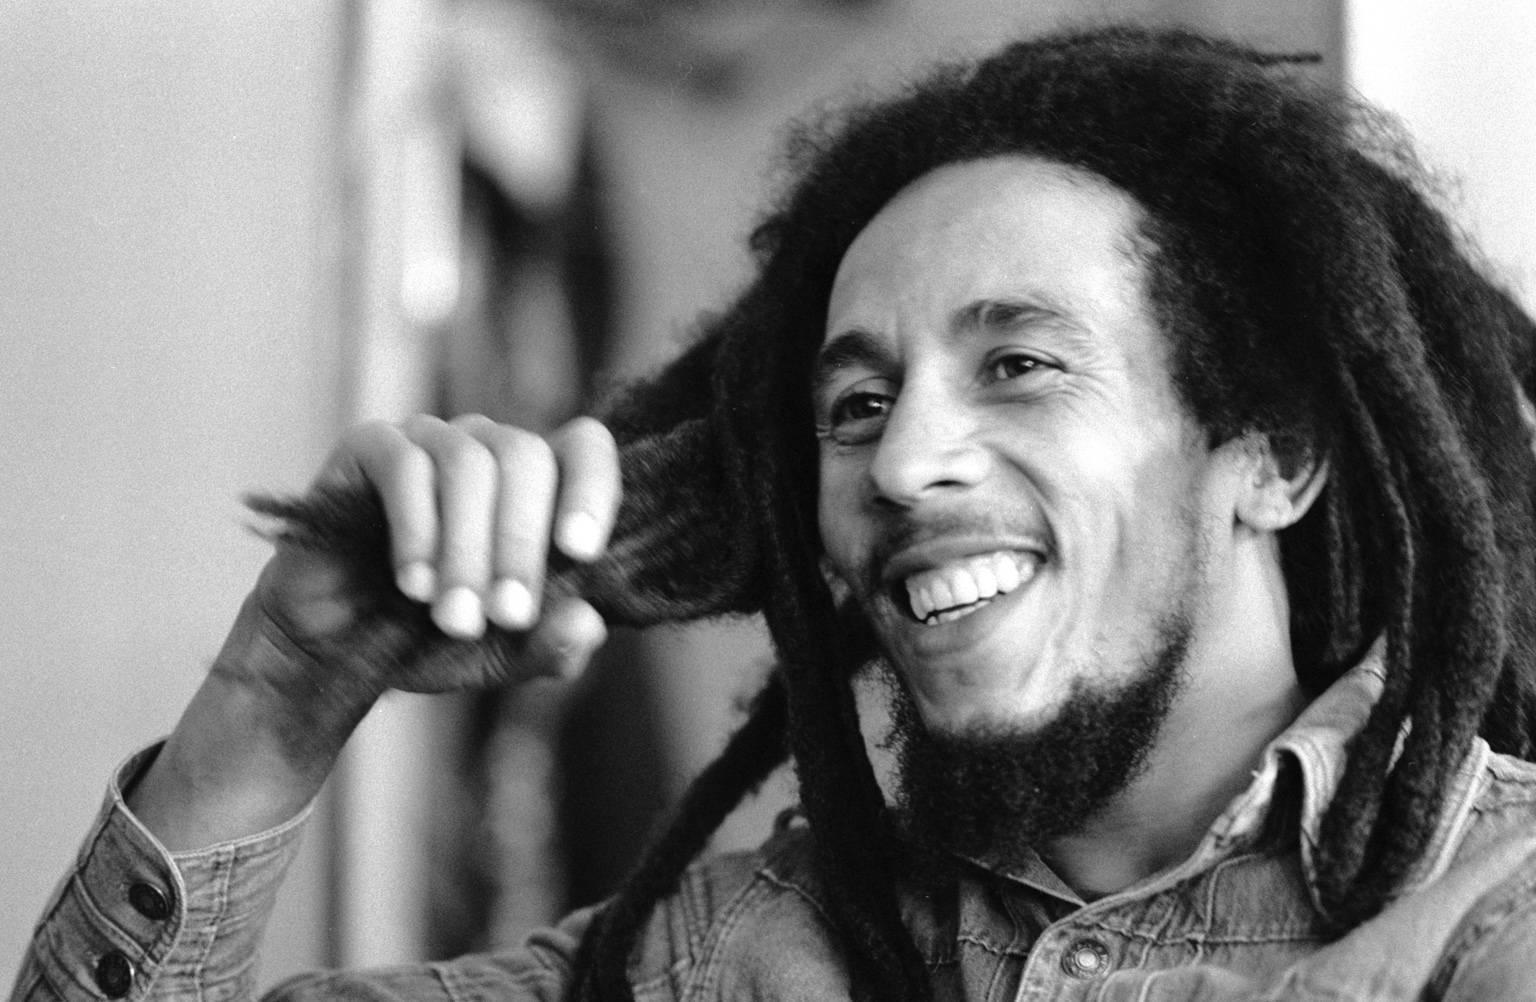 Unknown Portrait Photograph - 'Bob Marley Smile' 1978 ( Galerie Prints Limited Edition)